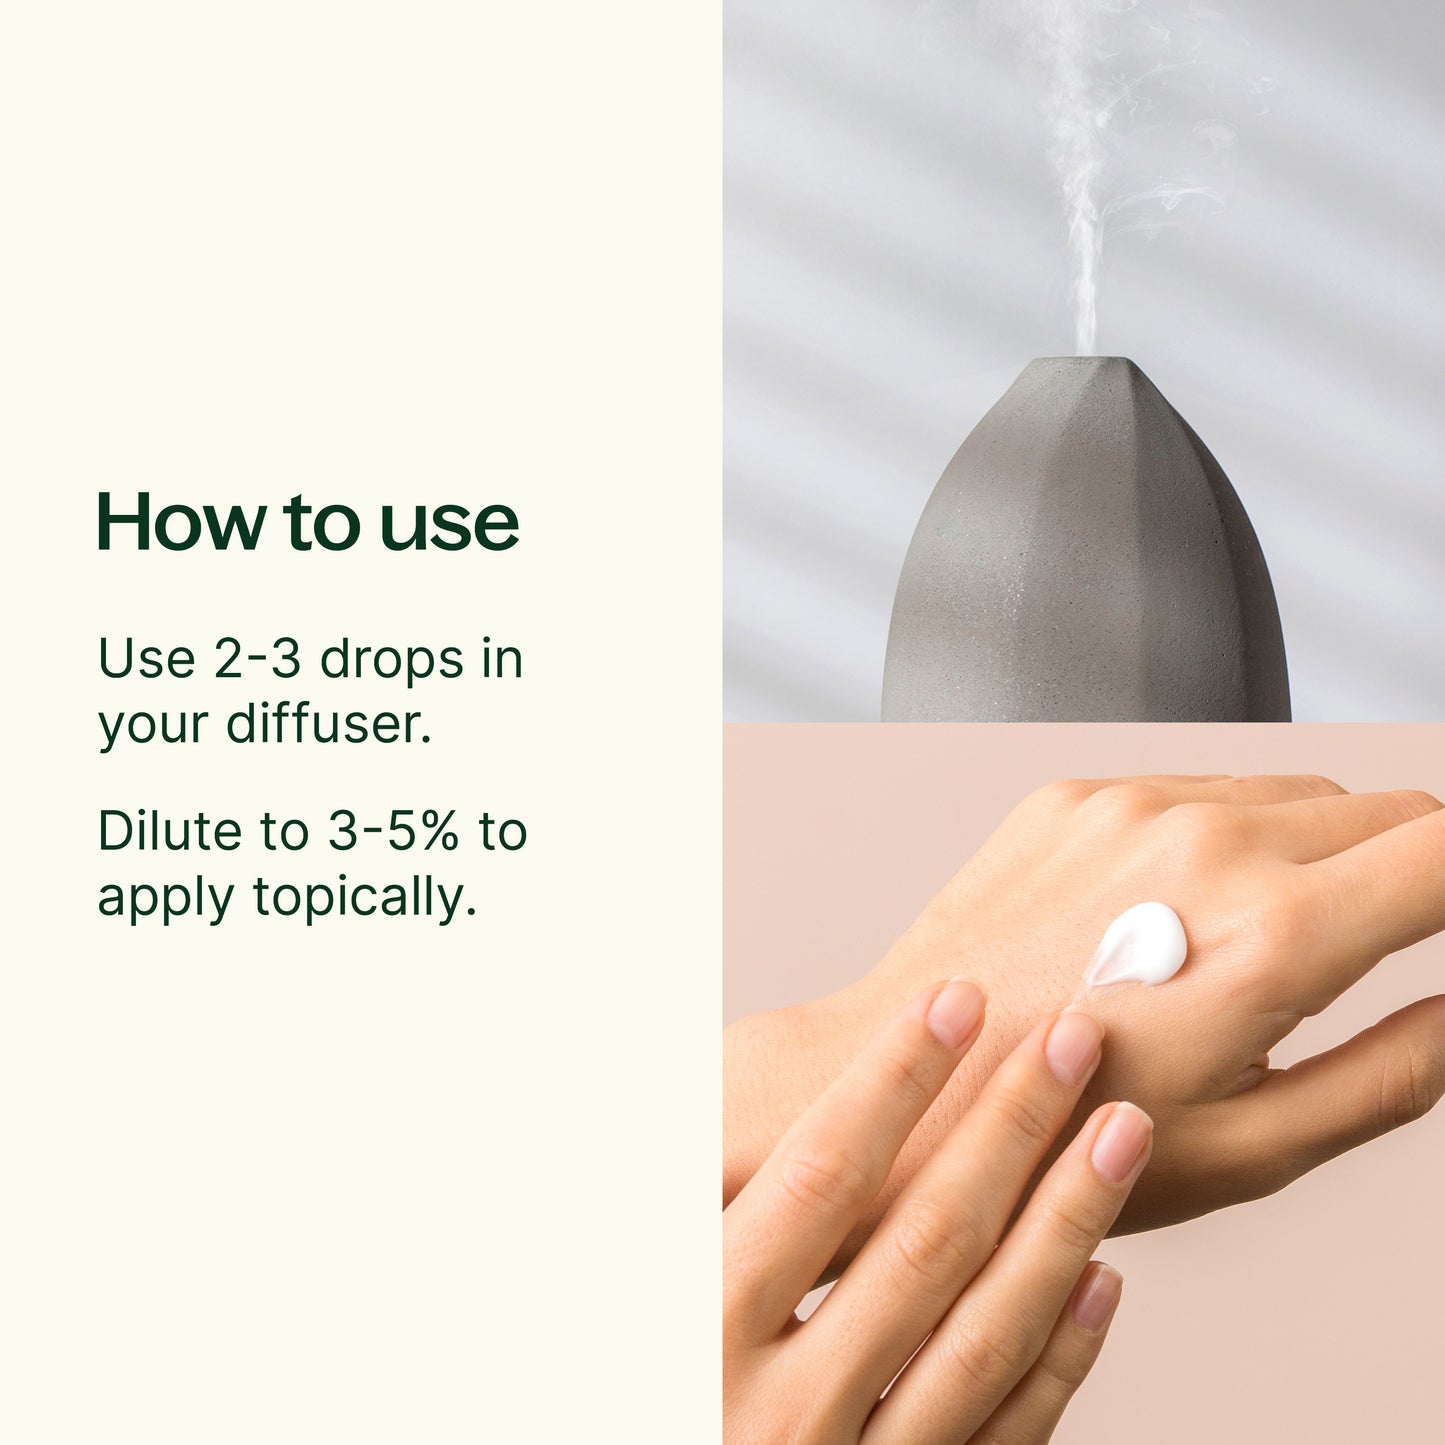 How to Use Sniffle Stopper KidSafe Essential Oil: Use 2-3 drops in your diffuser. Or dilute to 3-5% to apply topically. 